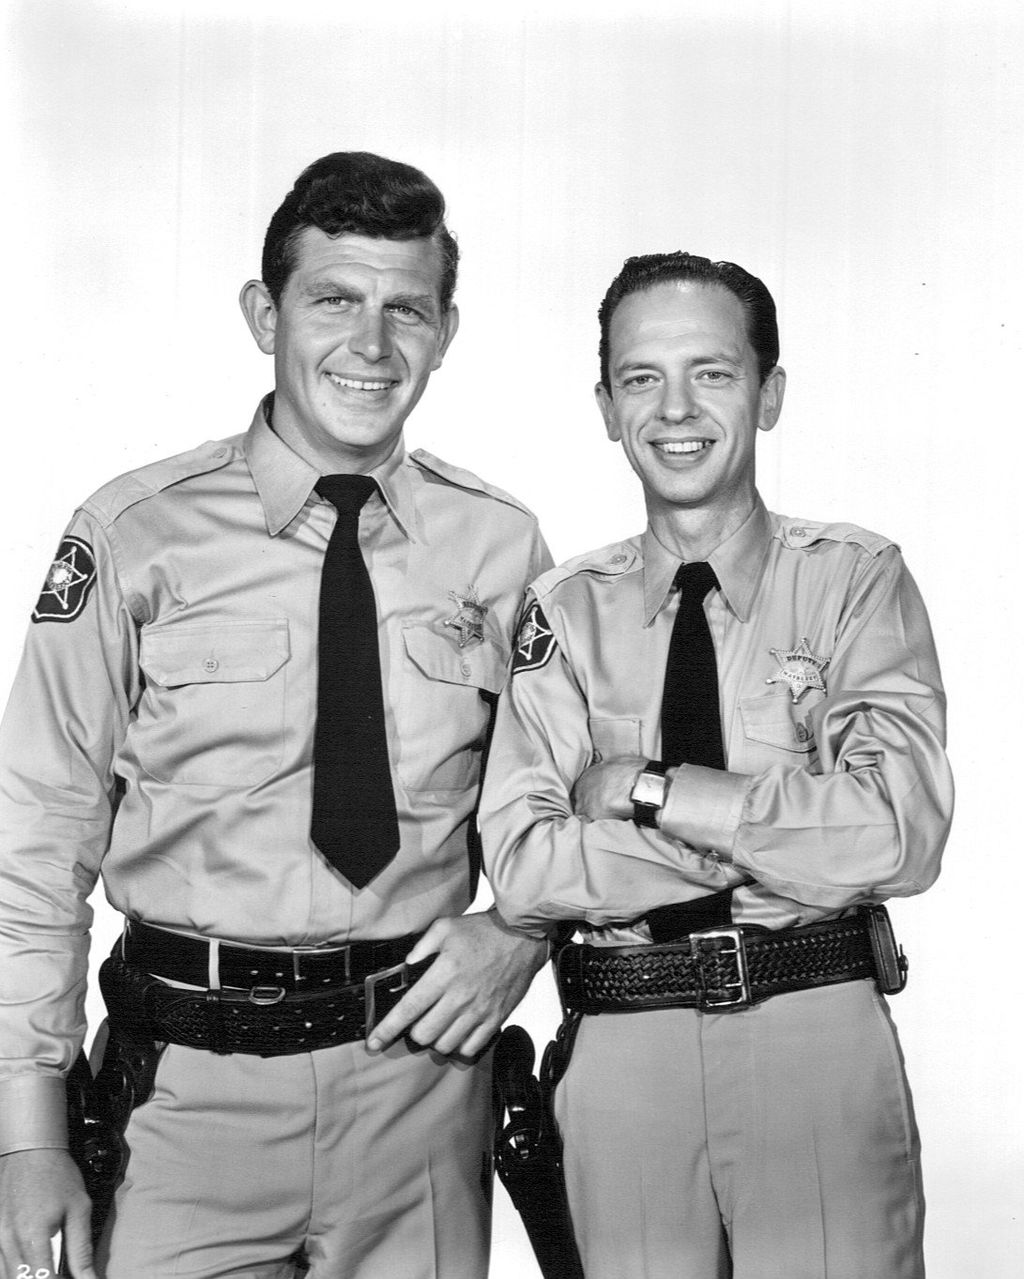 Andy Griffith as Sheriff Andy Taylor and Don Knotts as Deputy Barney Fife from the premiere of 